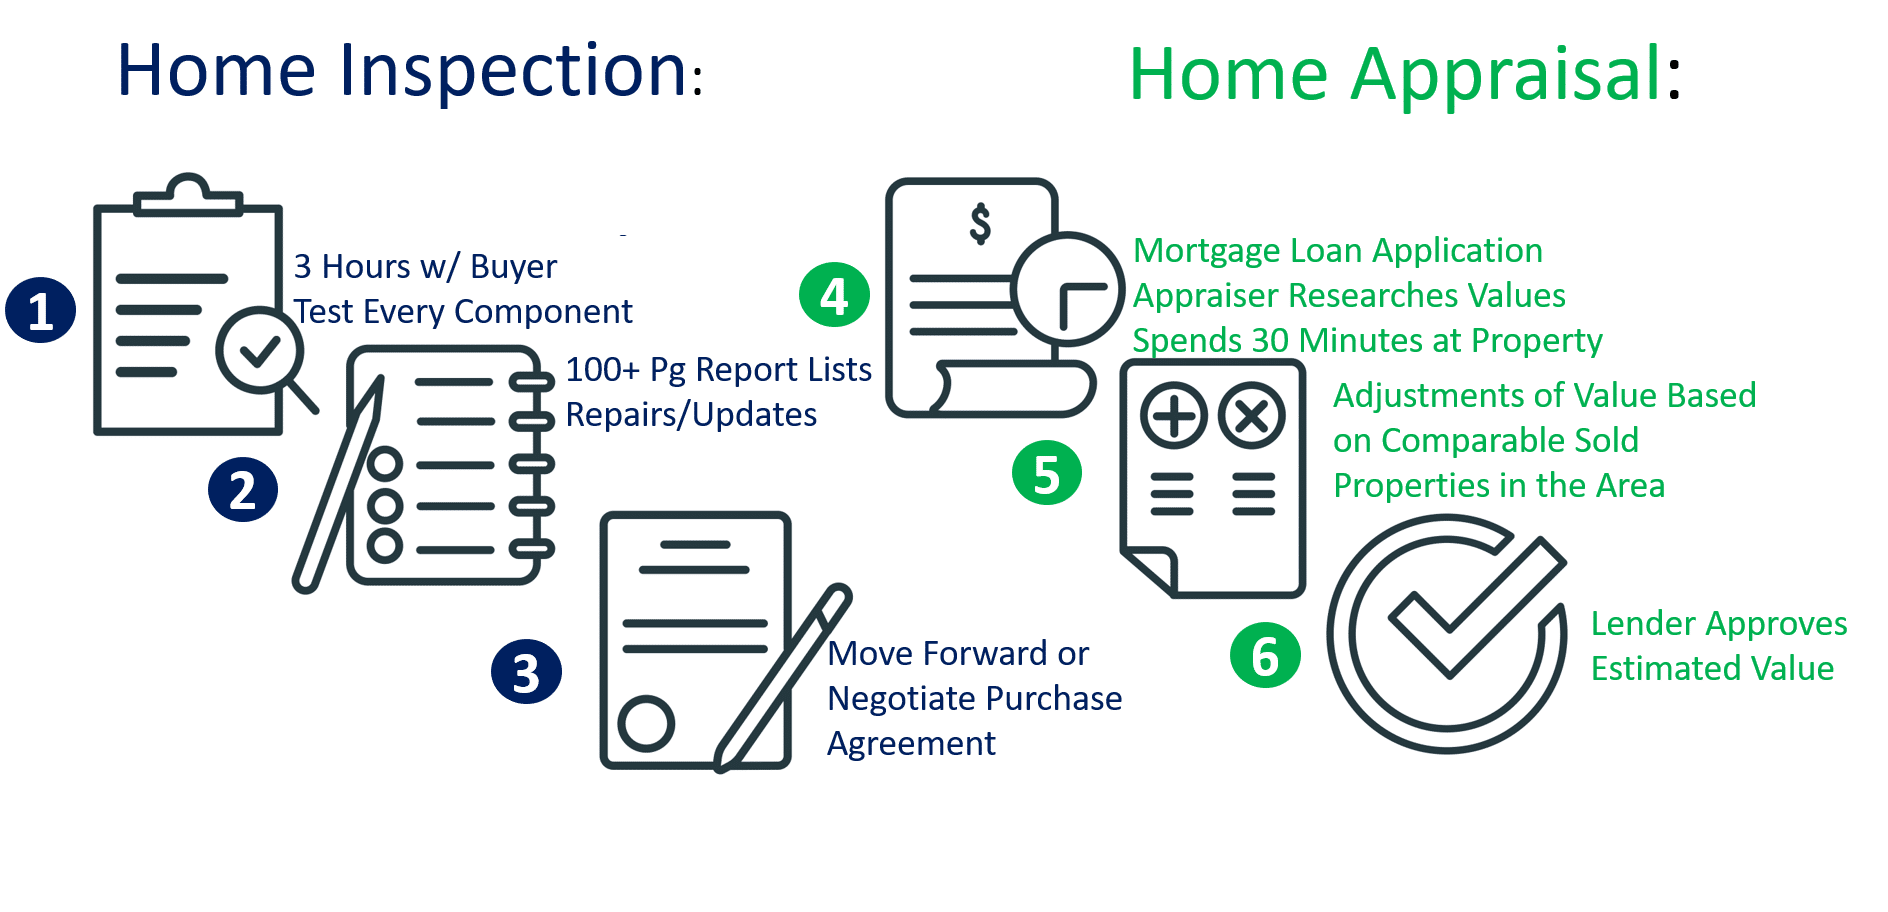 Difference between home appraisal and home inspection